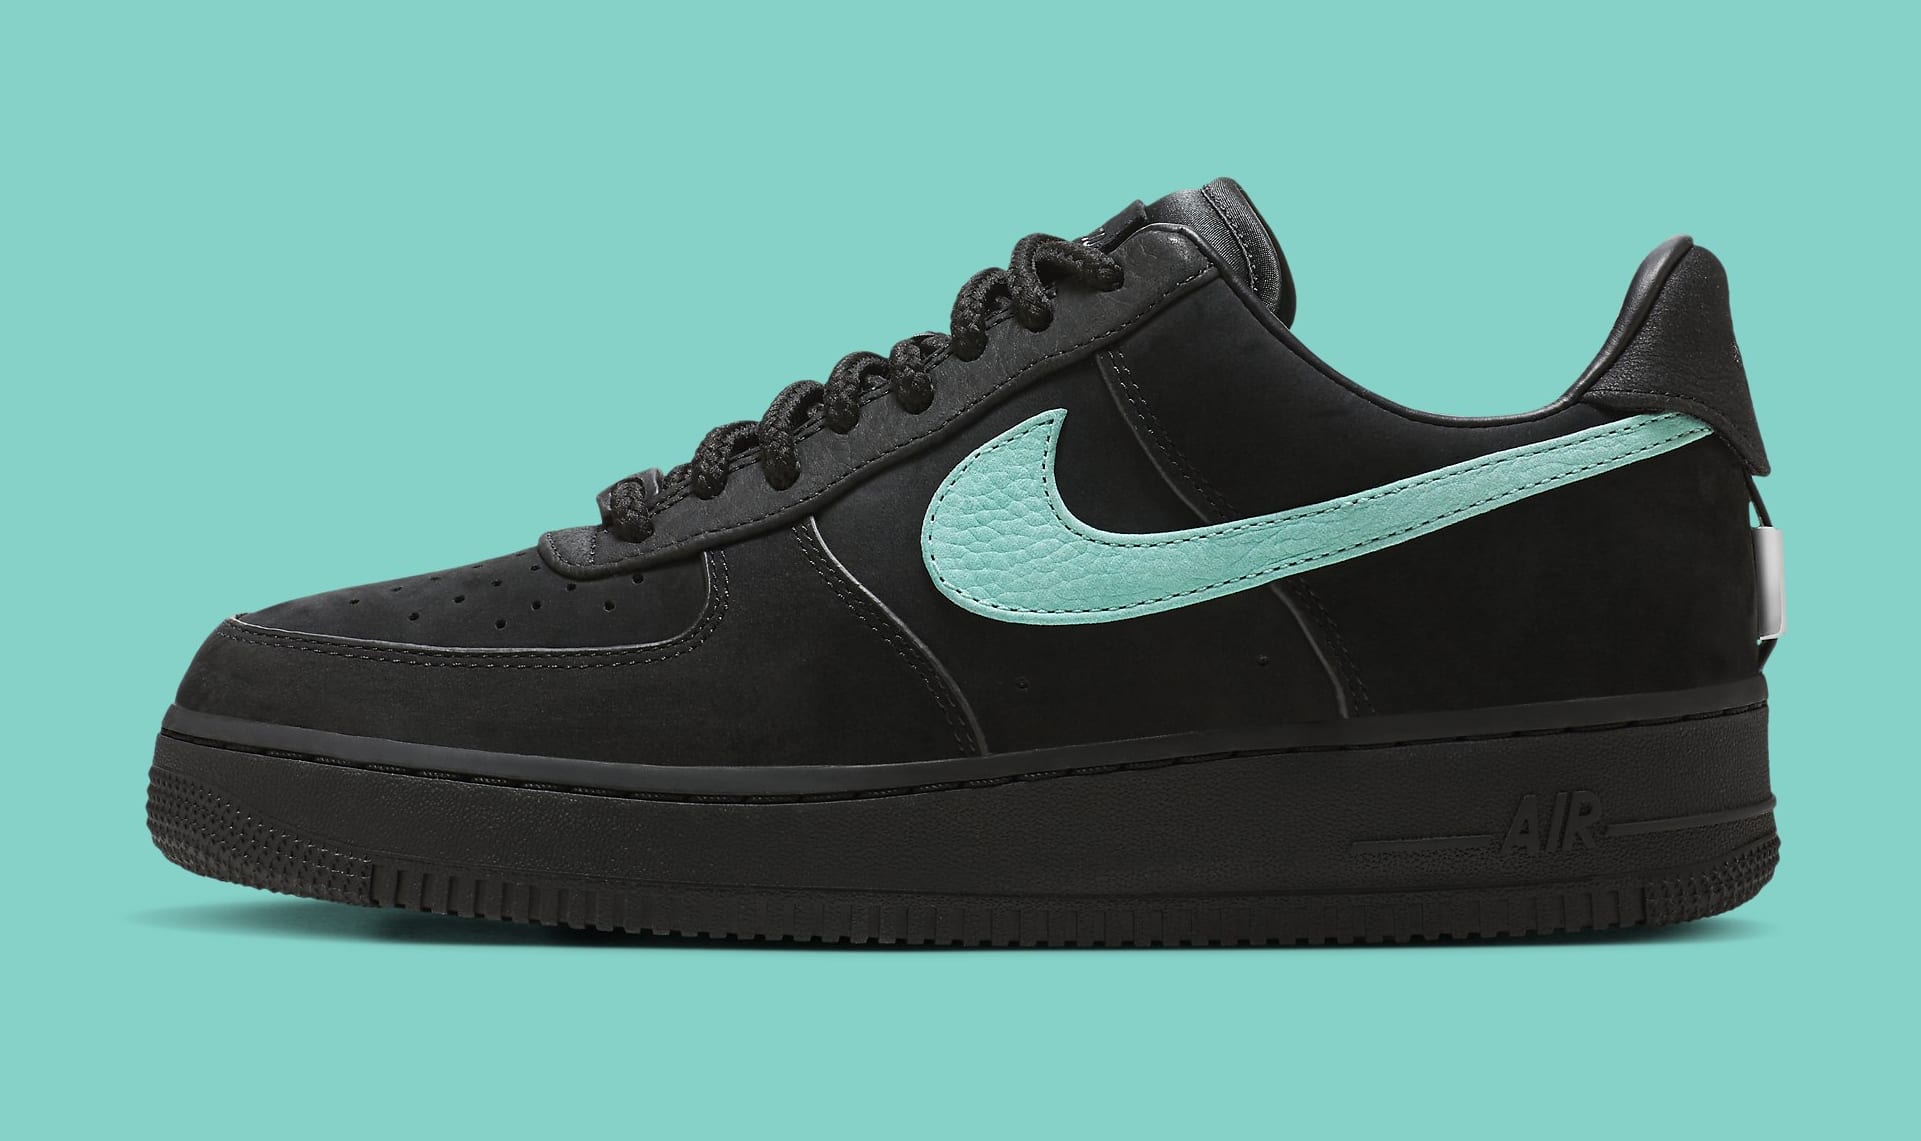 Tiffany & Co. x Nike Air Force 1 Low DZ1382 001 Lateral